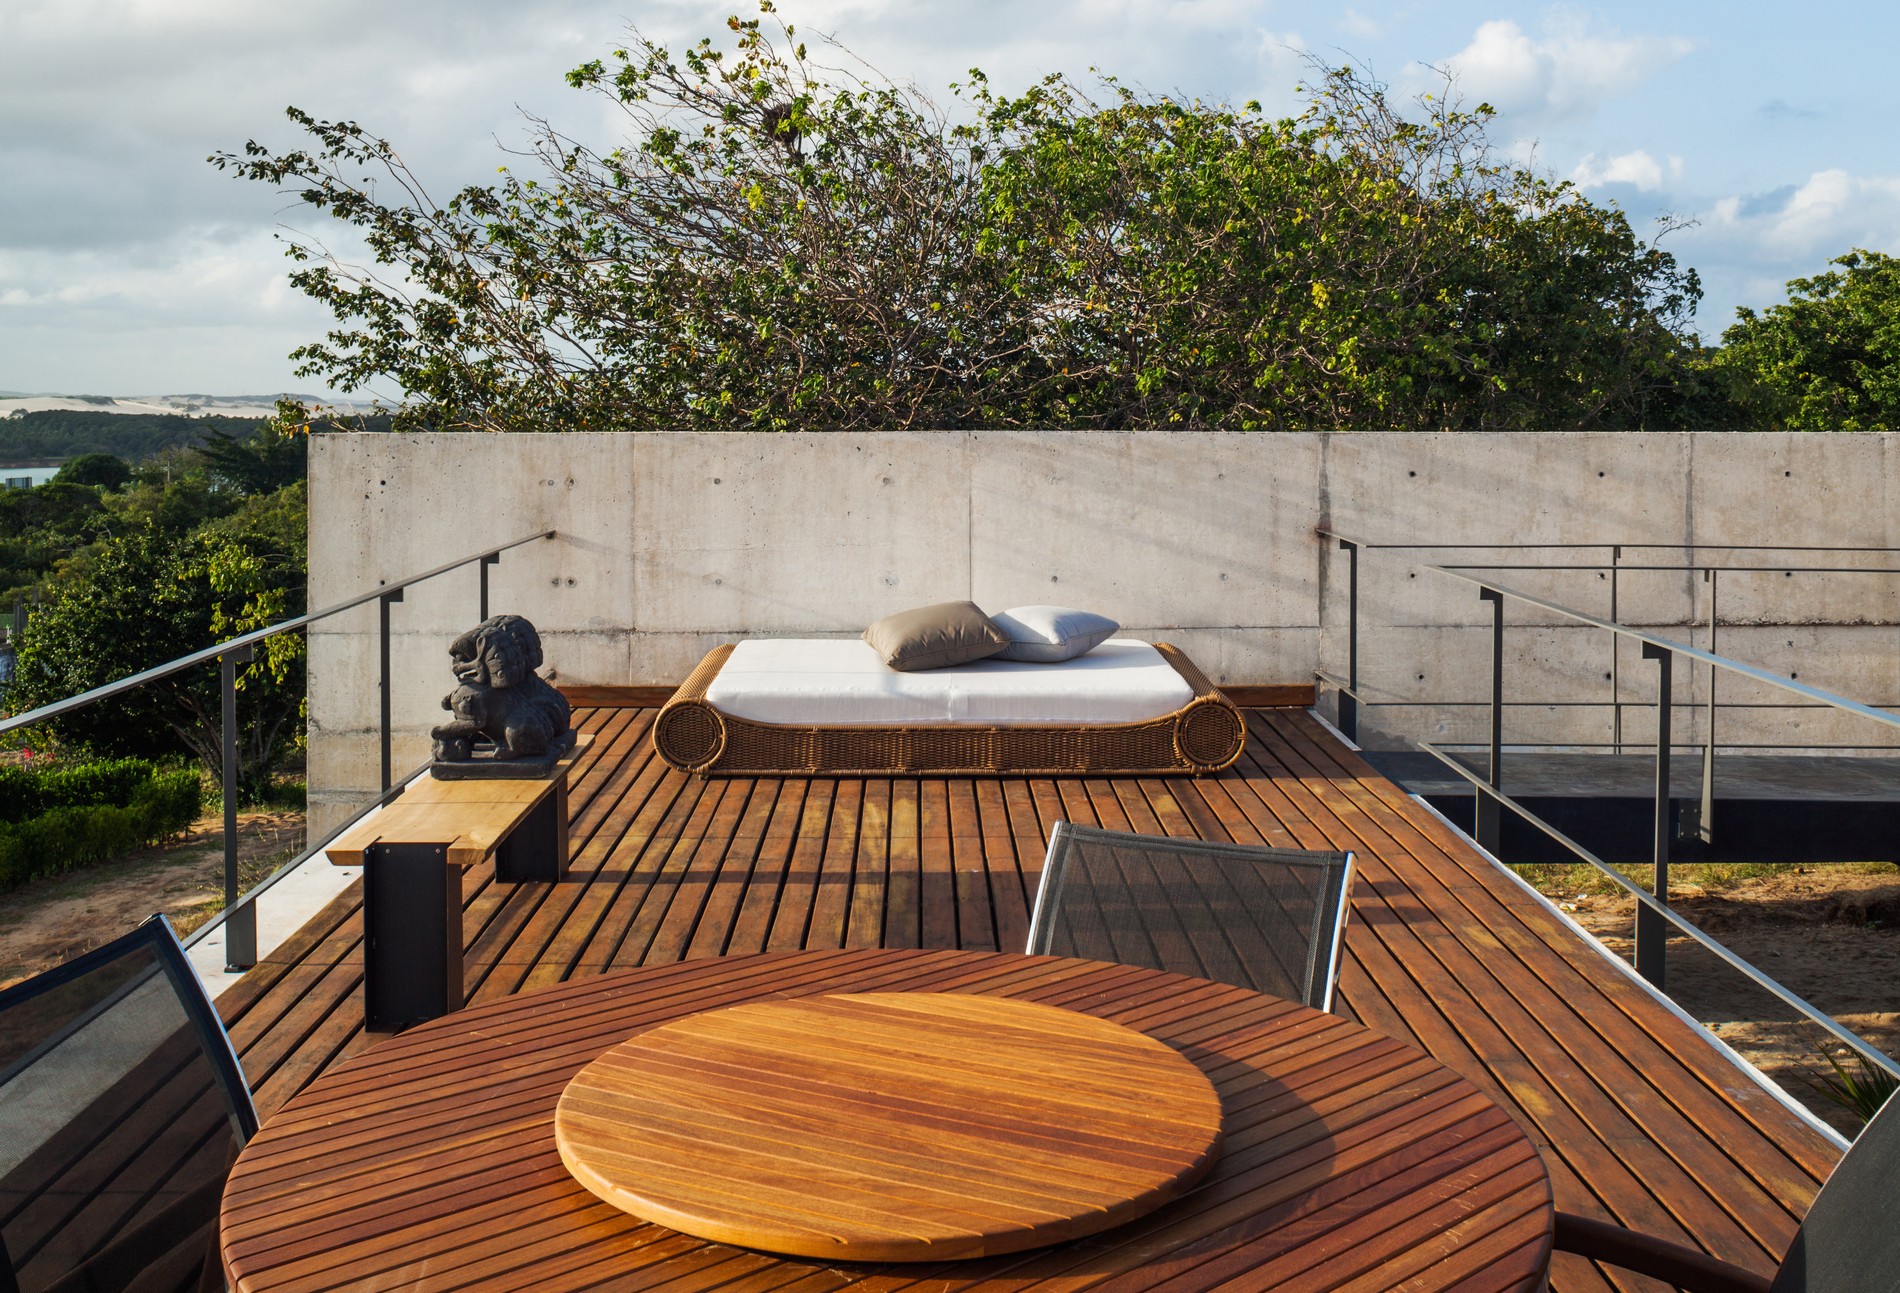 Terrace on the roof with a marvelous place to rest, three chairs and round table